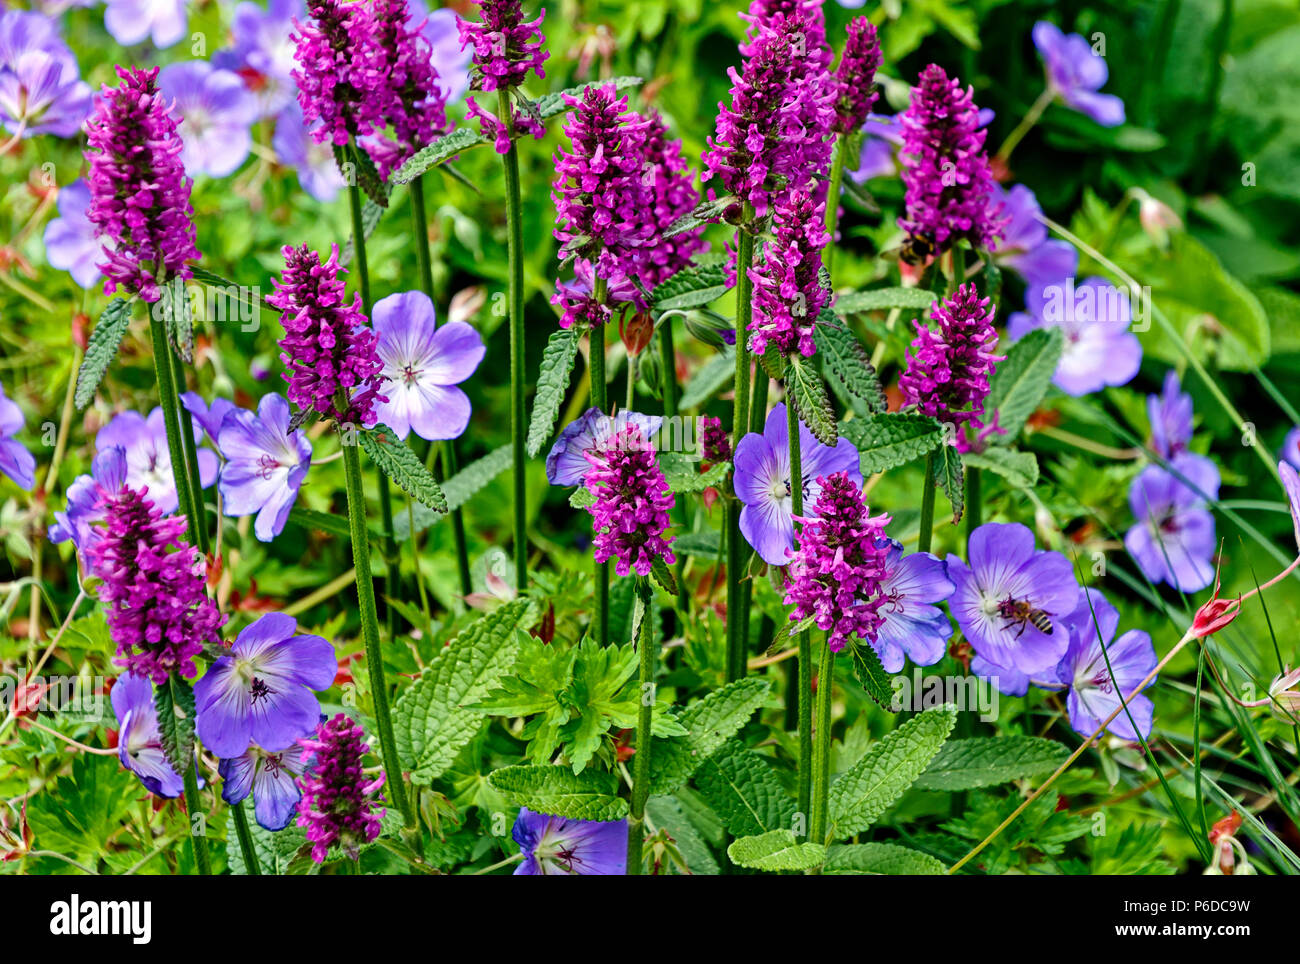 Stachys monnieri Hummelo perennial herbaceous flowering plant and Geranium robertianum, commonly known as Herb-Robert Stock Photo